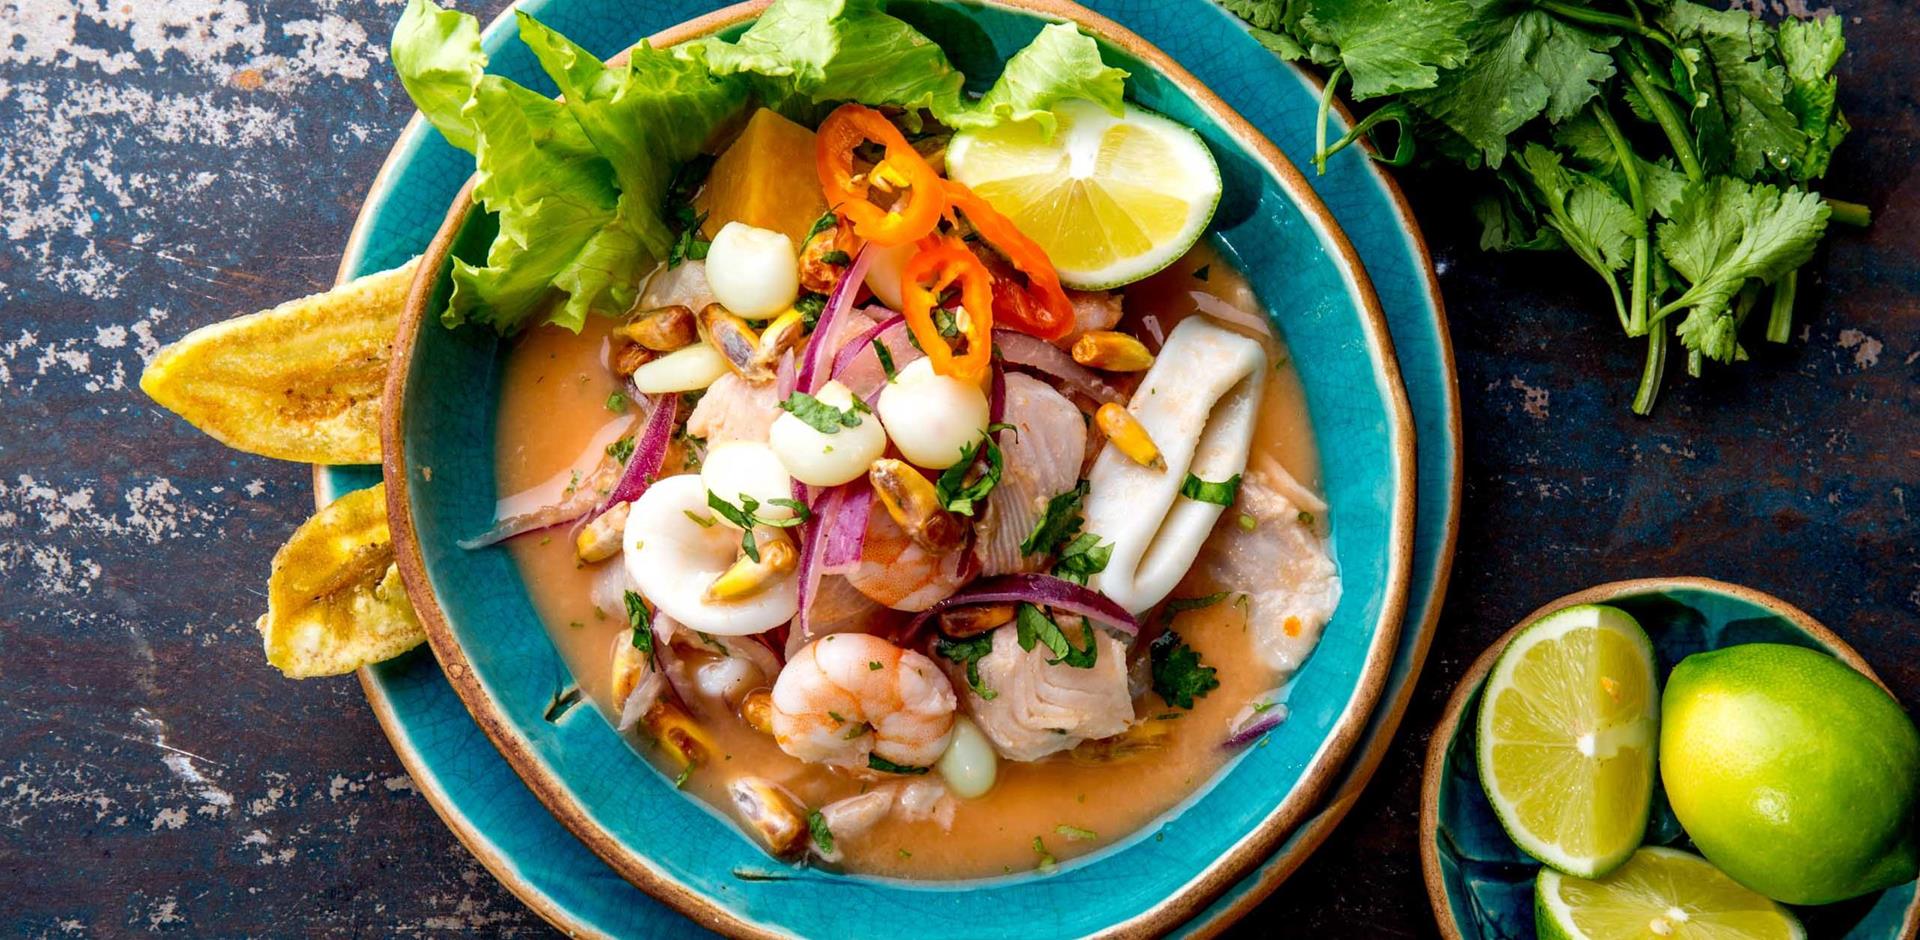 Learn how to cook ceviche